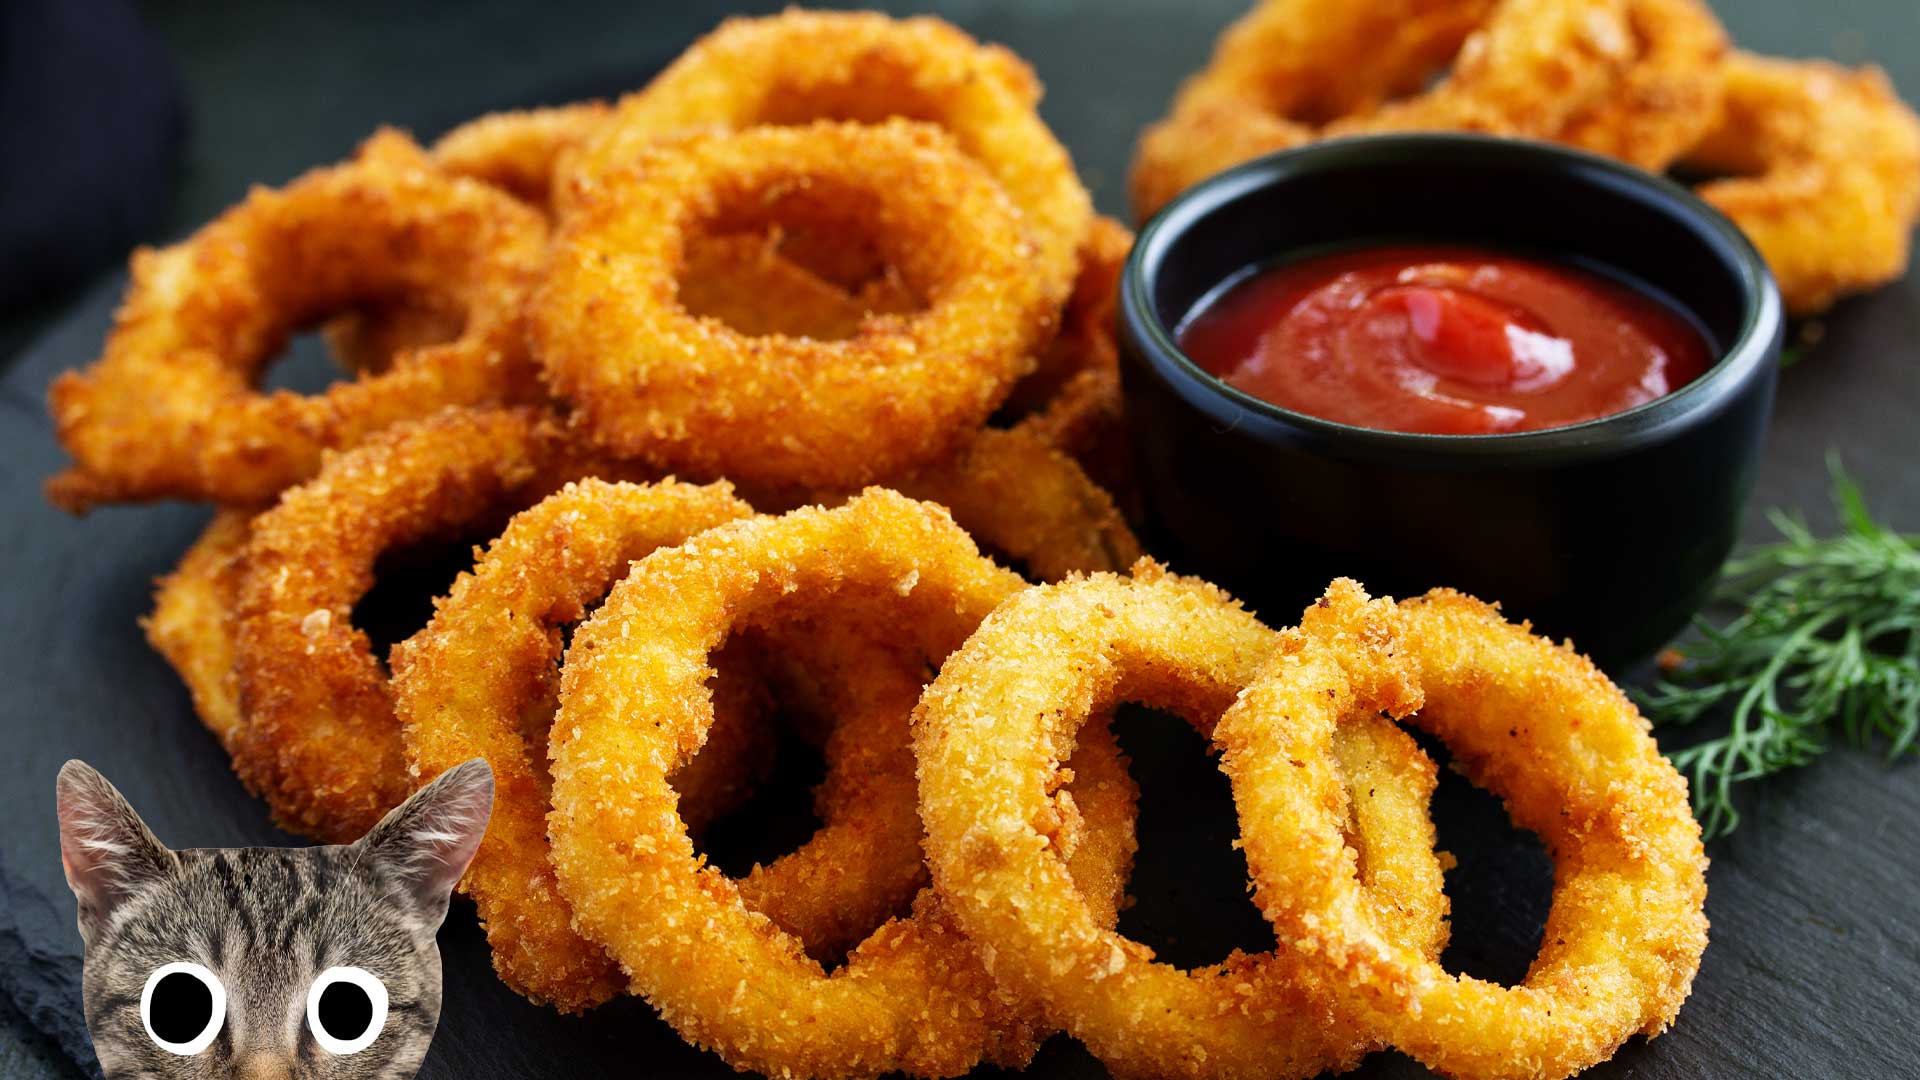 A plate of onion rings